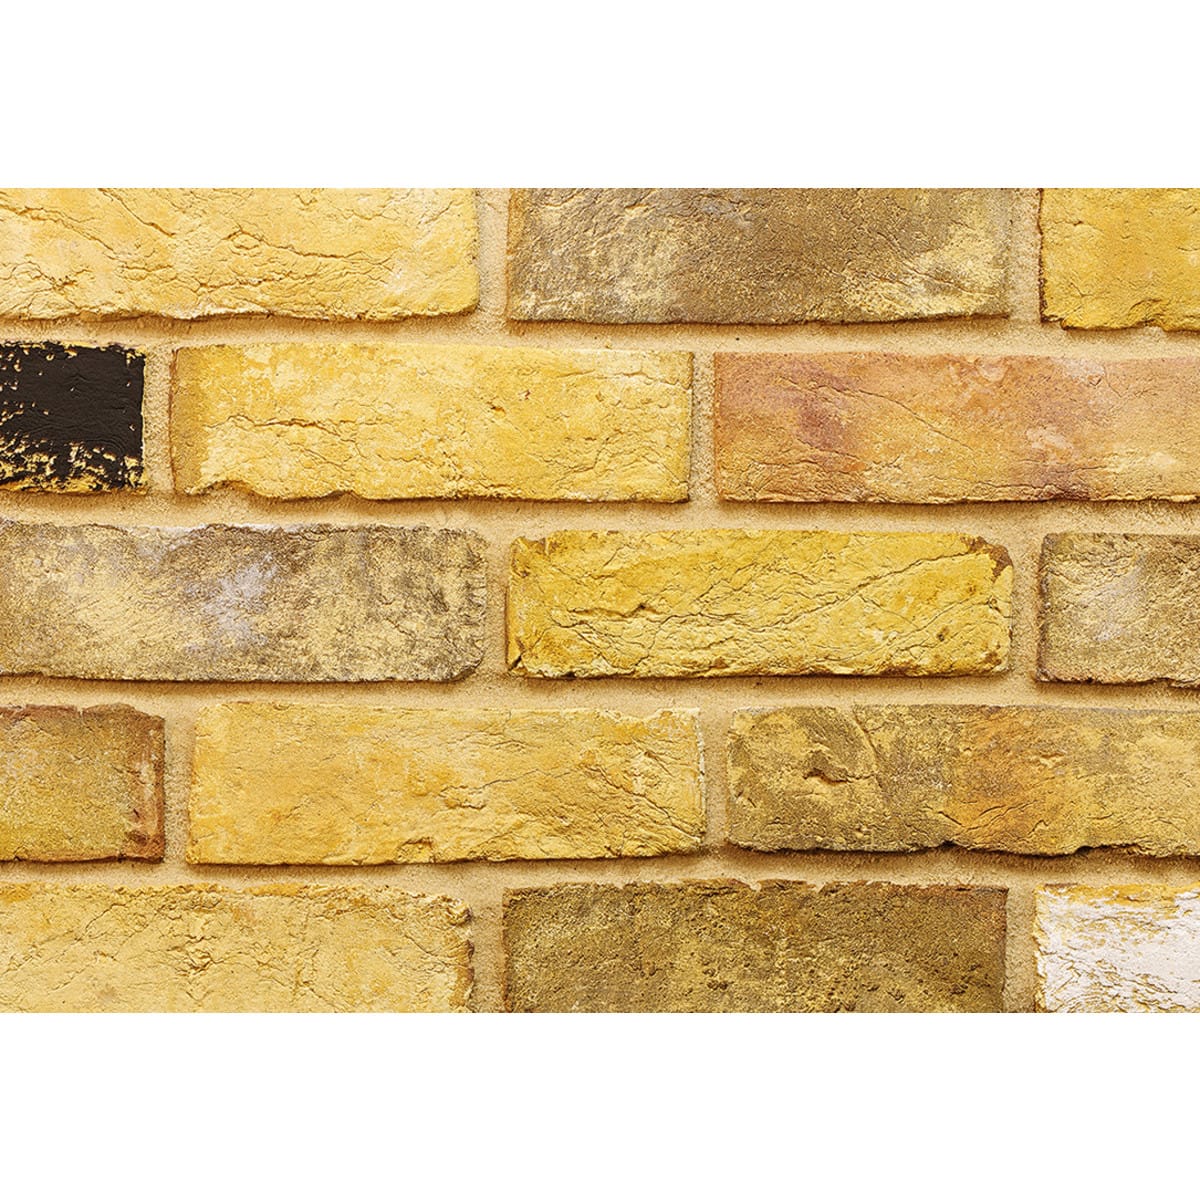 What are Standard Brick Dimensions in the UK?